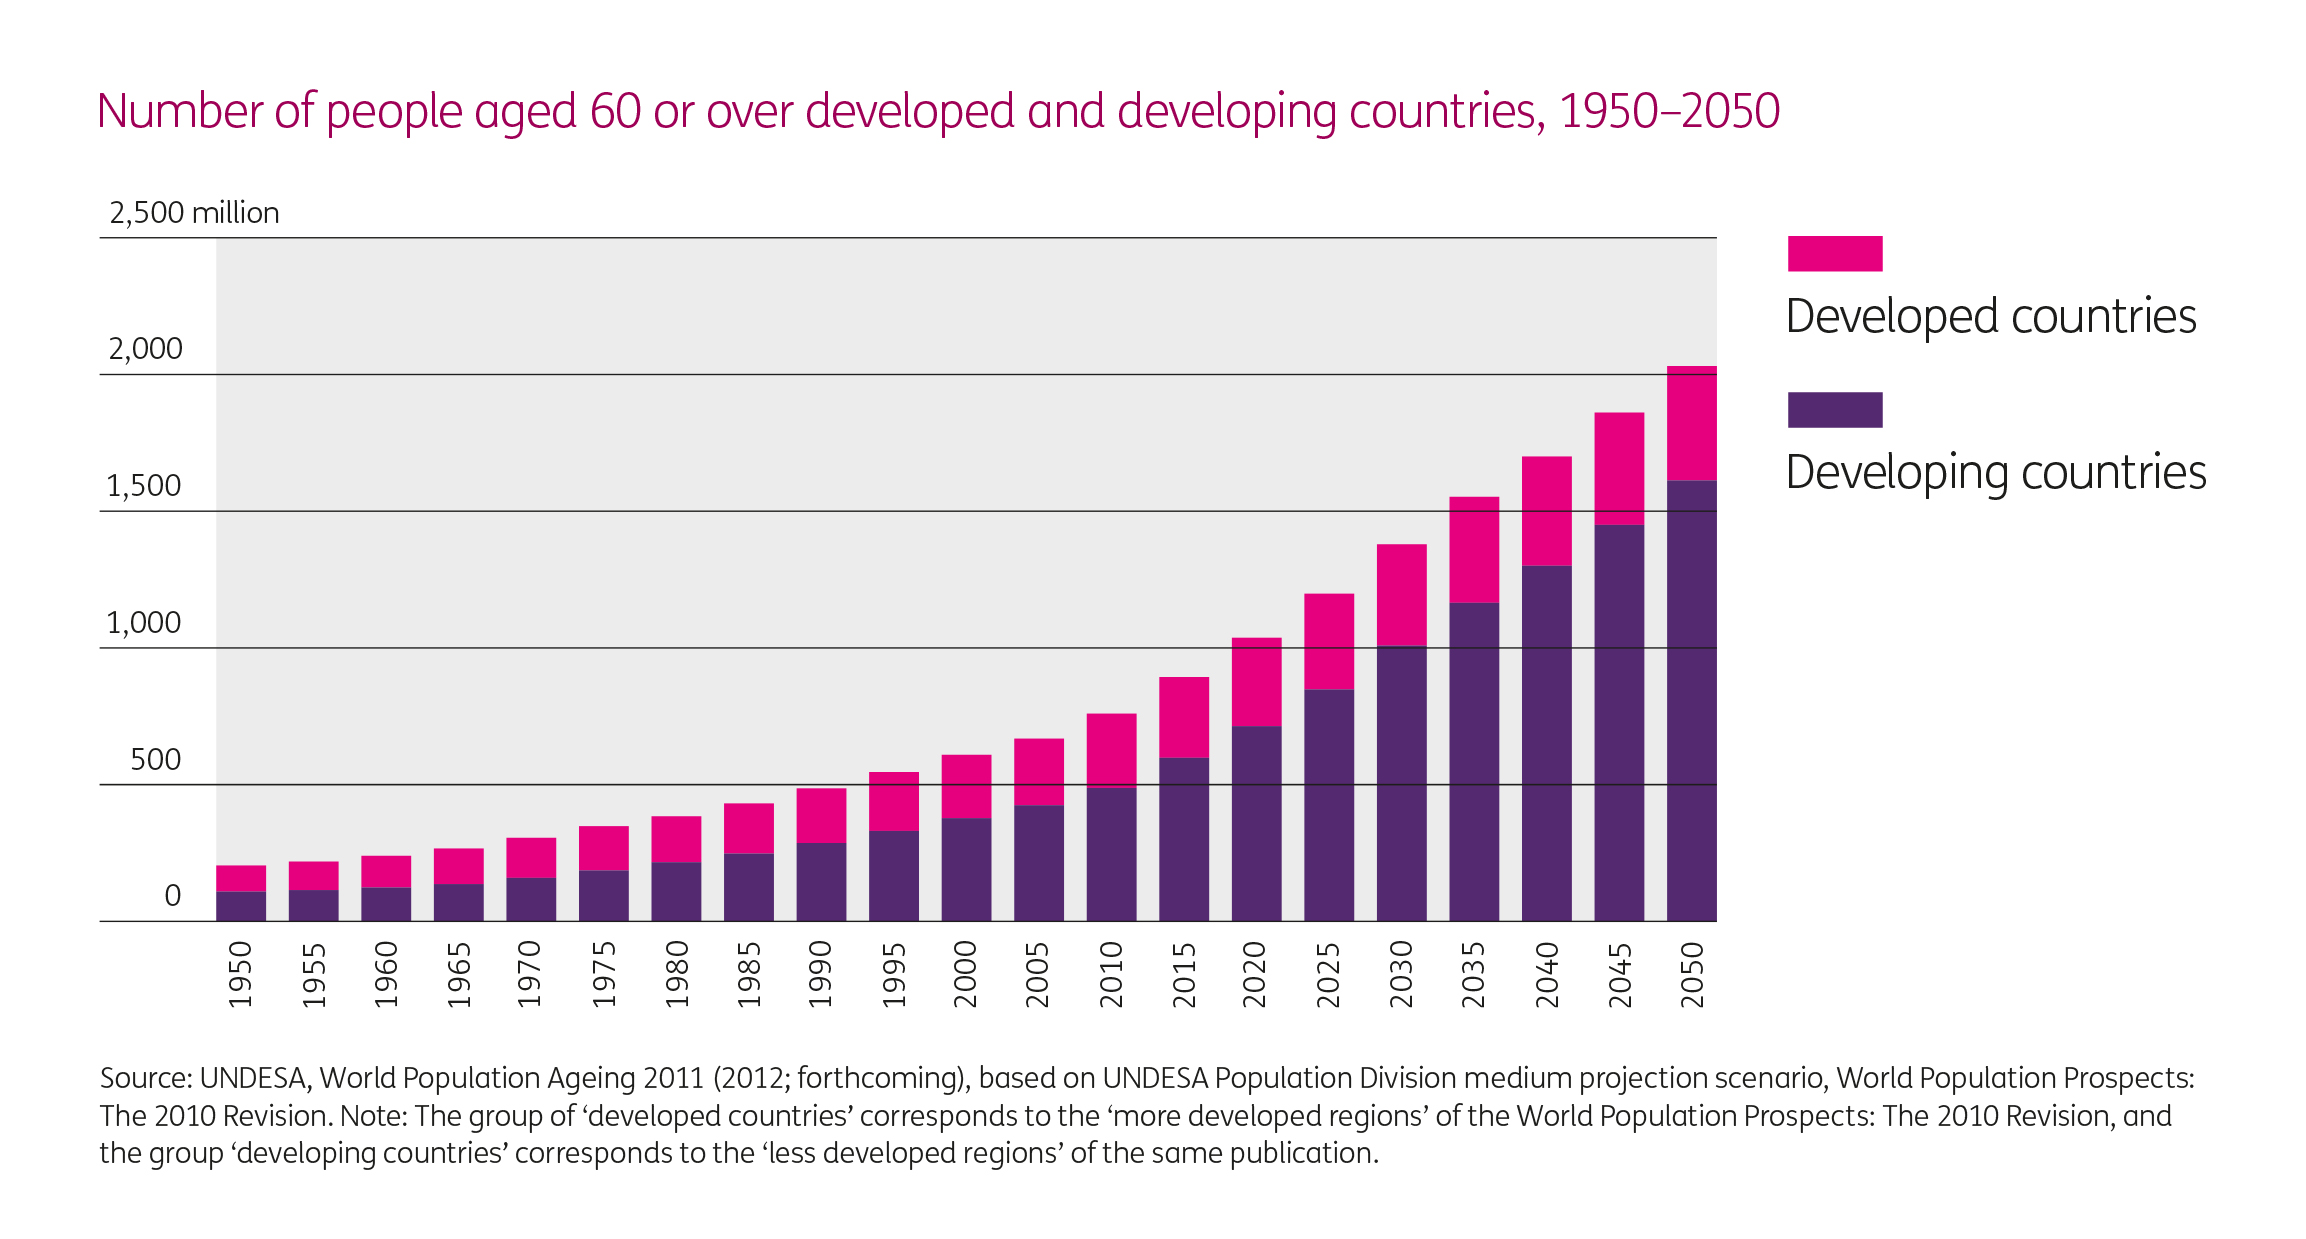 Number of people aged 60 or over developed and developing countries 1950-2050